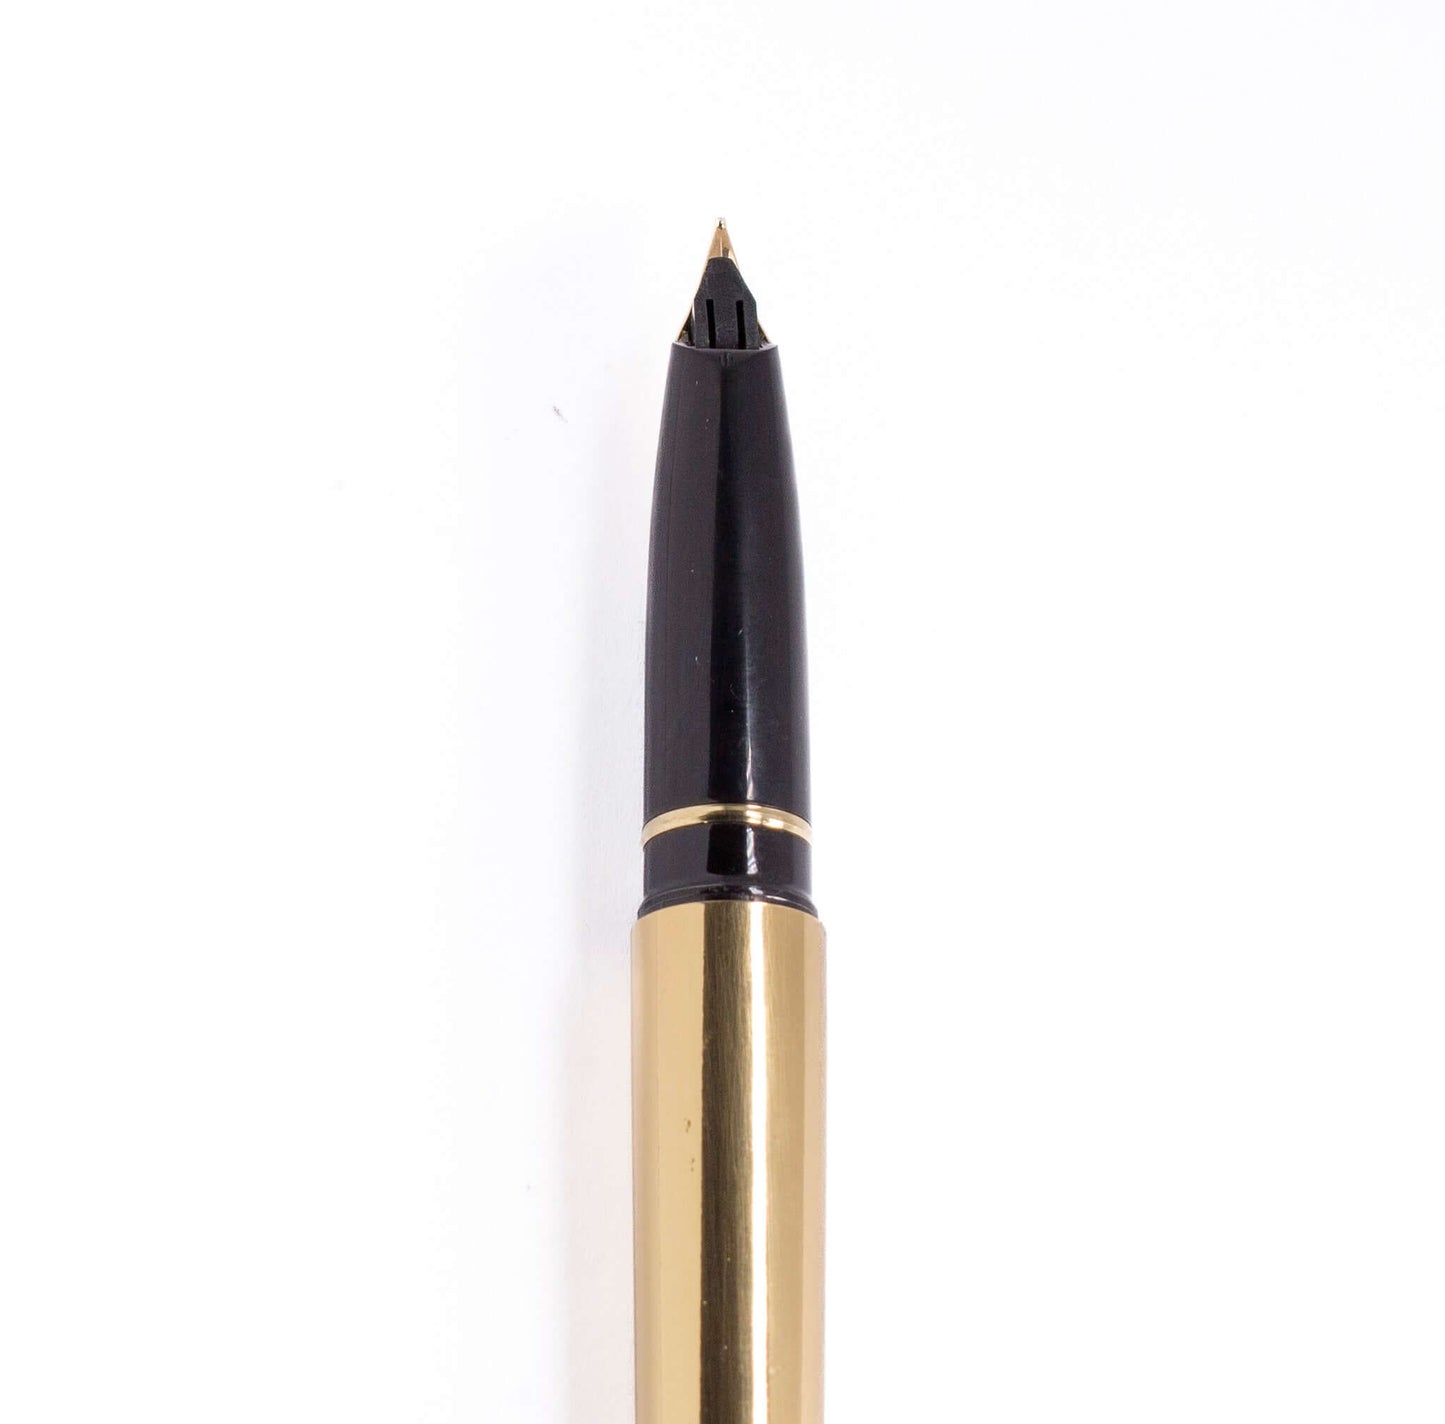 ${titleName/Type: Sheaffer Targa Manufacture Year: Circa 1986- 1996 Length: 5 3/8 Filling System: Cartridge Converter Color/Pattern: Brilliant Shined Brass with Lacquered Finish Nib Type/Condition and remarks: 14K Gold Inlaid Medium Nib Condition: This Sh